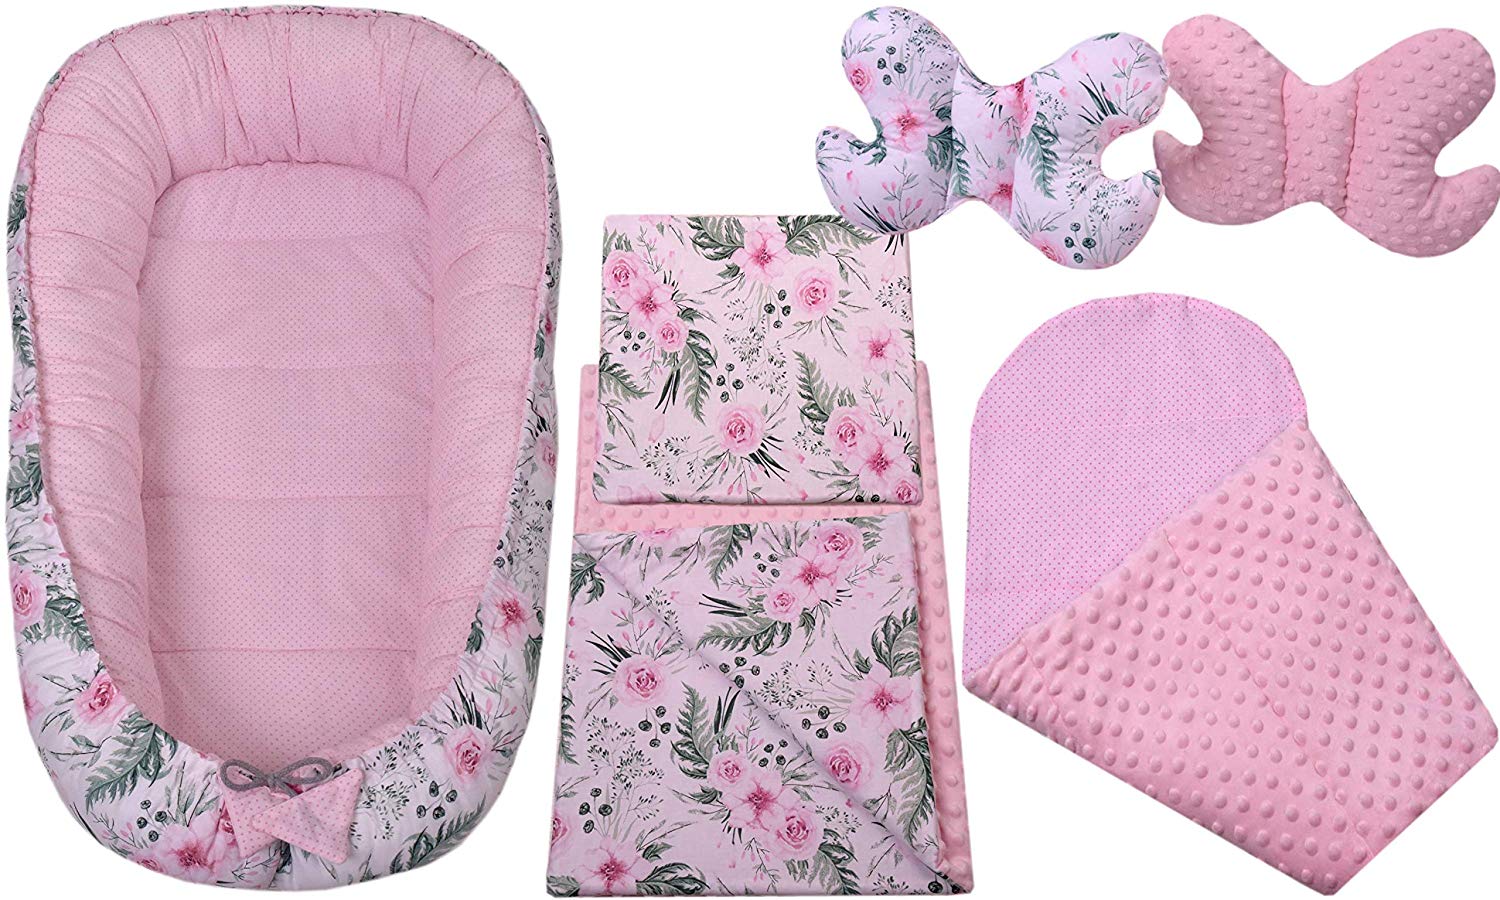 Medi Partners 5-Piece Baby Nest Set, 90 x 50 cm, Removable Insert Bed, Cuddly Nest, Crawling Blanket for Babies, Newborns, 100% Cotton (Flower with Light Pink Minky)